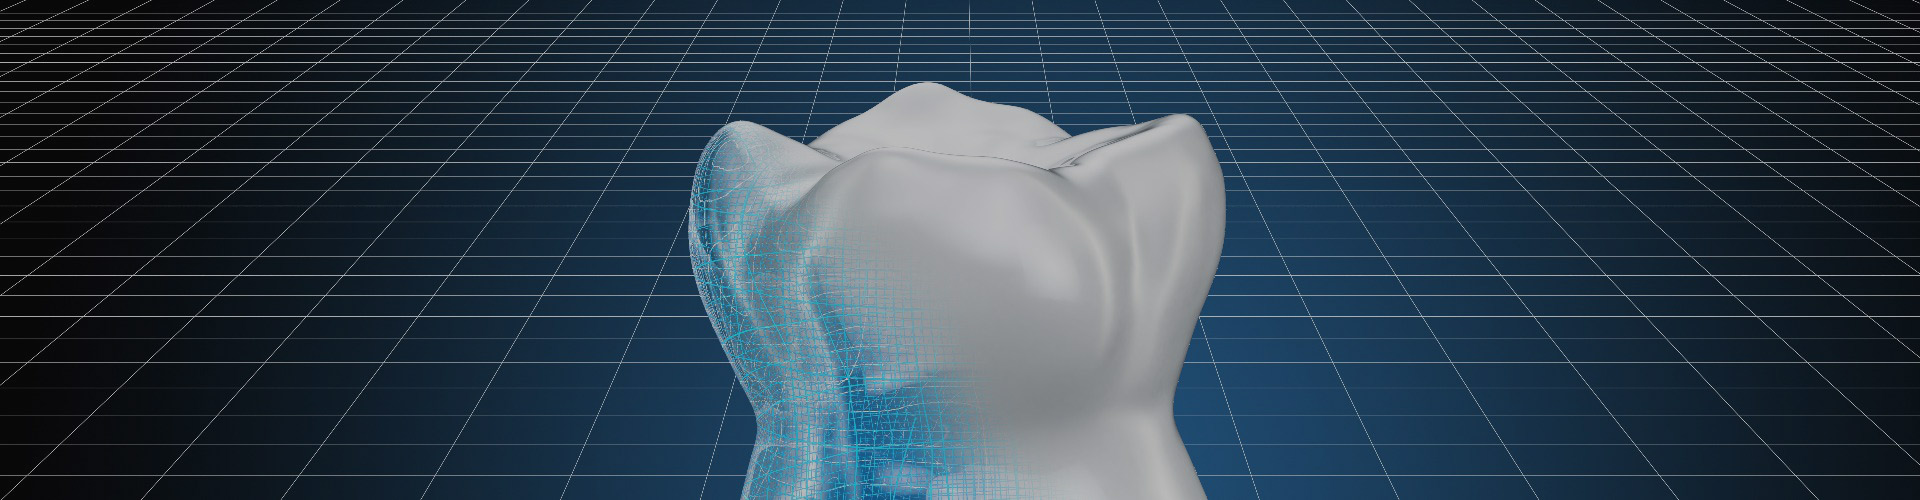 Visualization 3d cad model of human tooth, 3D rendering